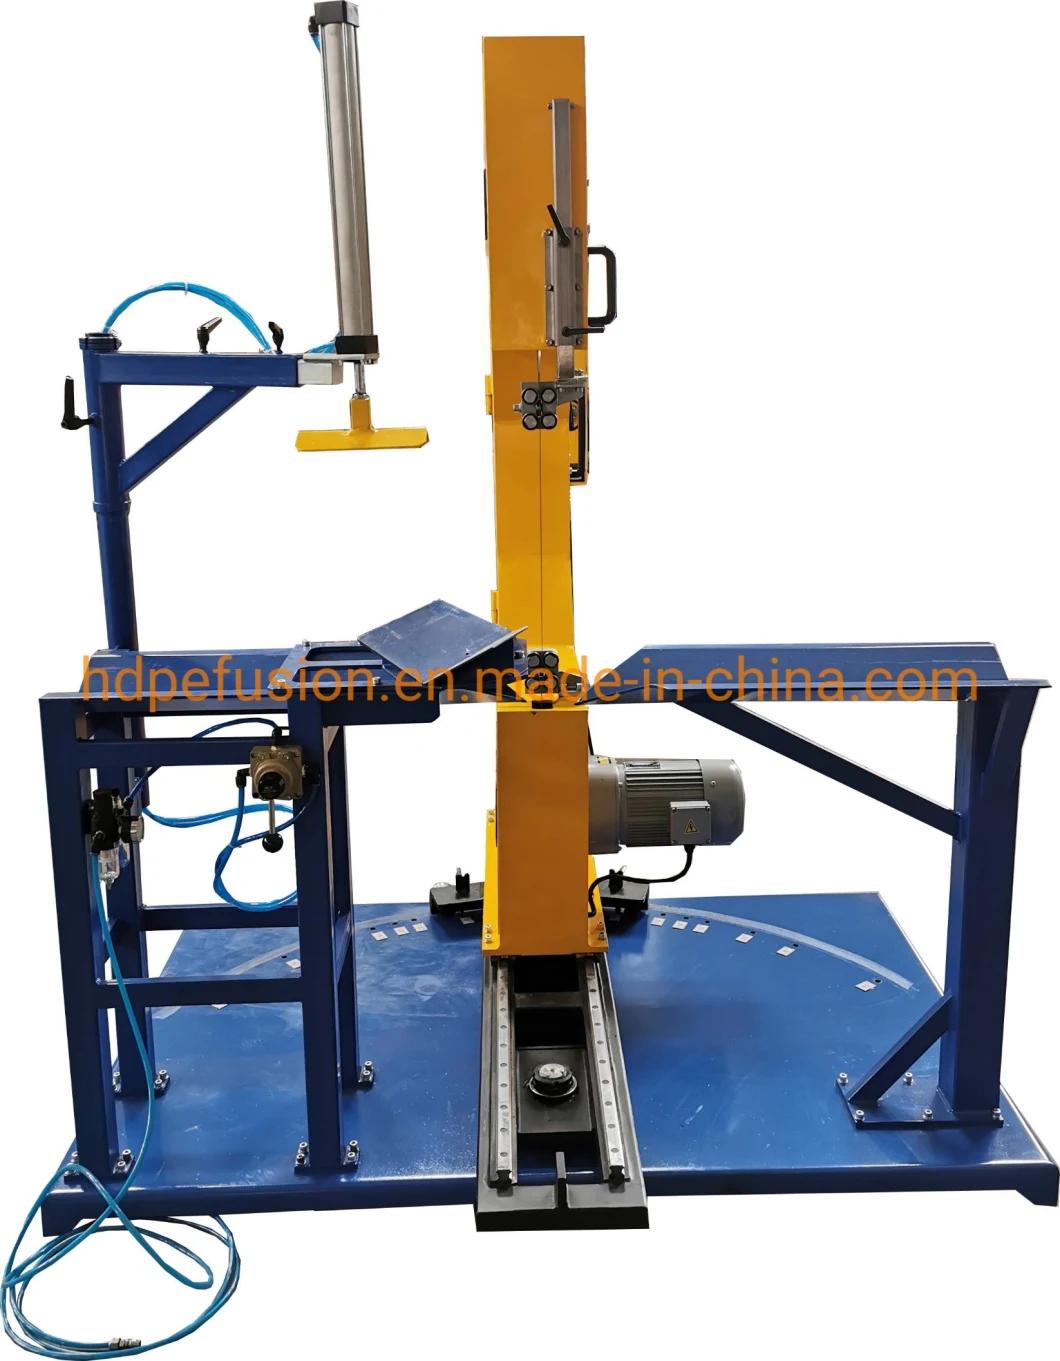 HDPE Pipe Band Saw Machines for Angle Cutting